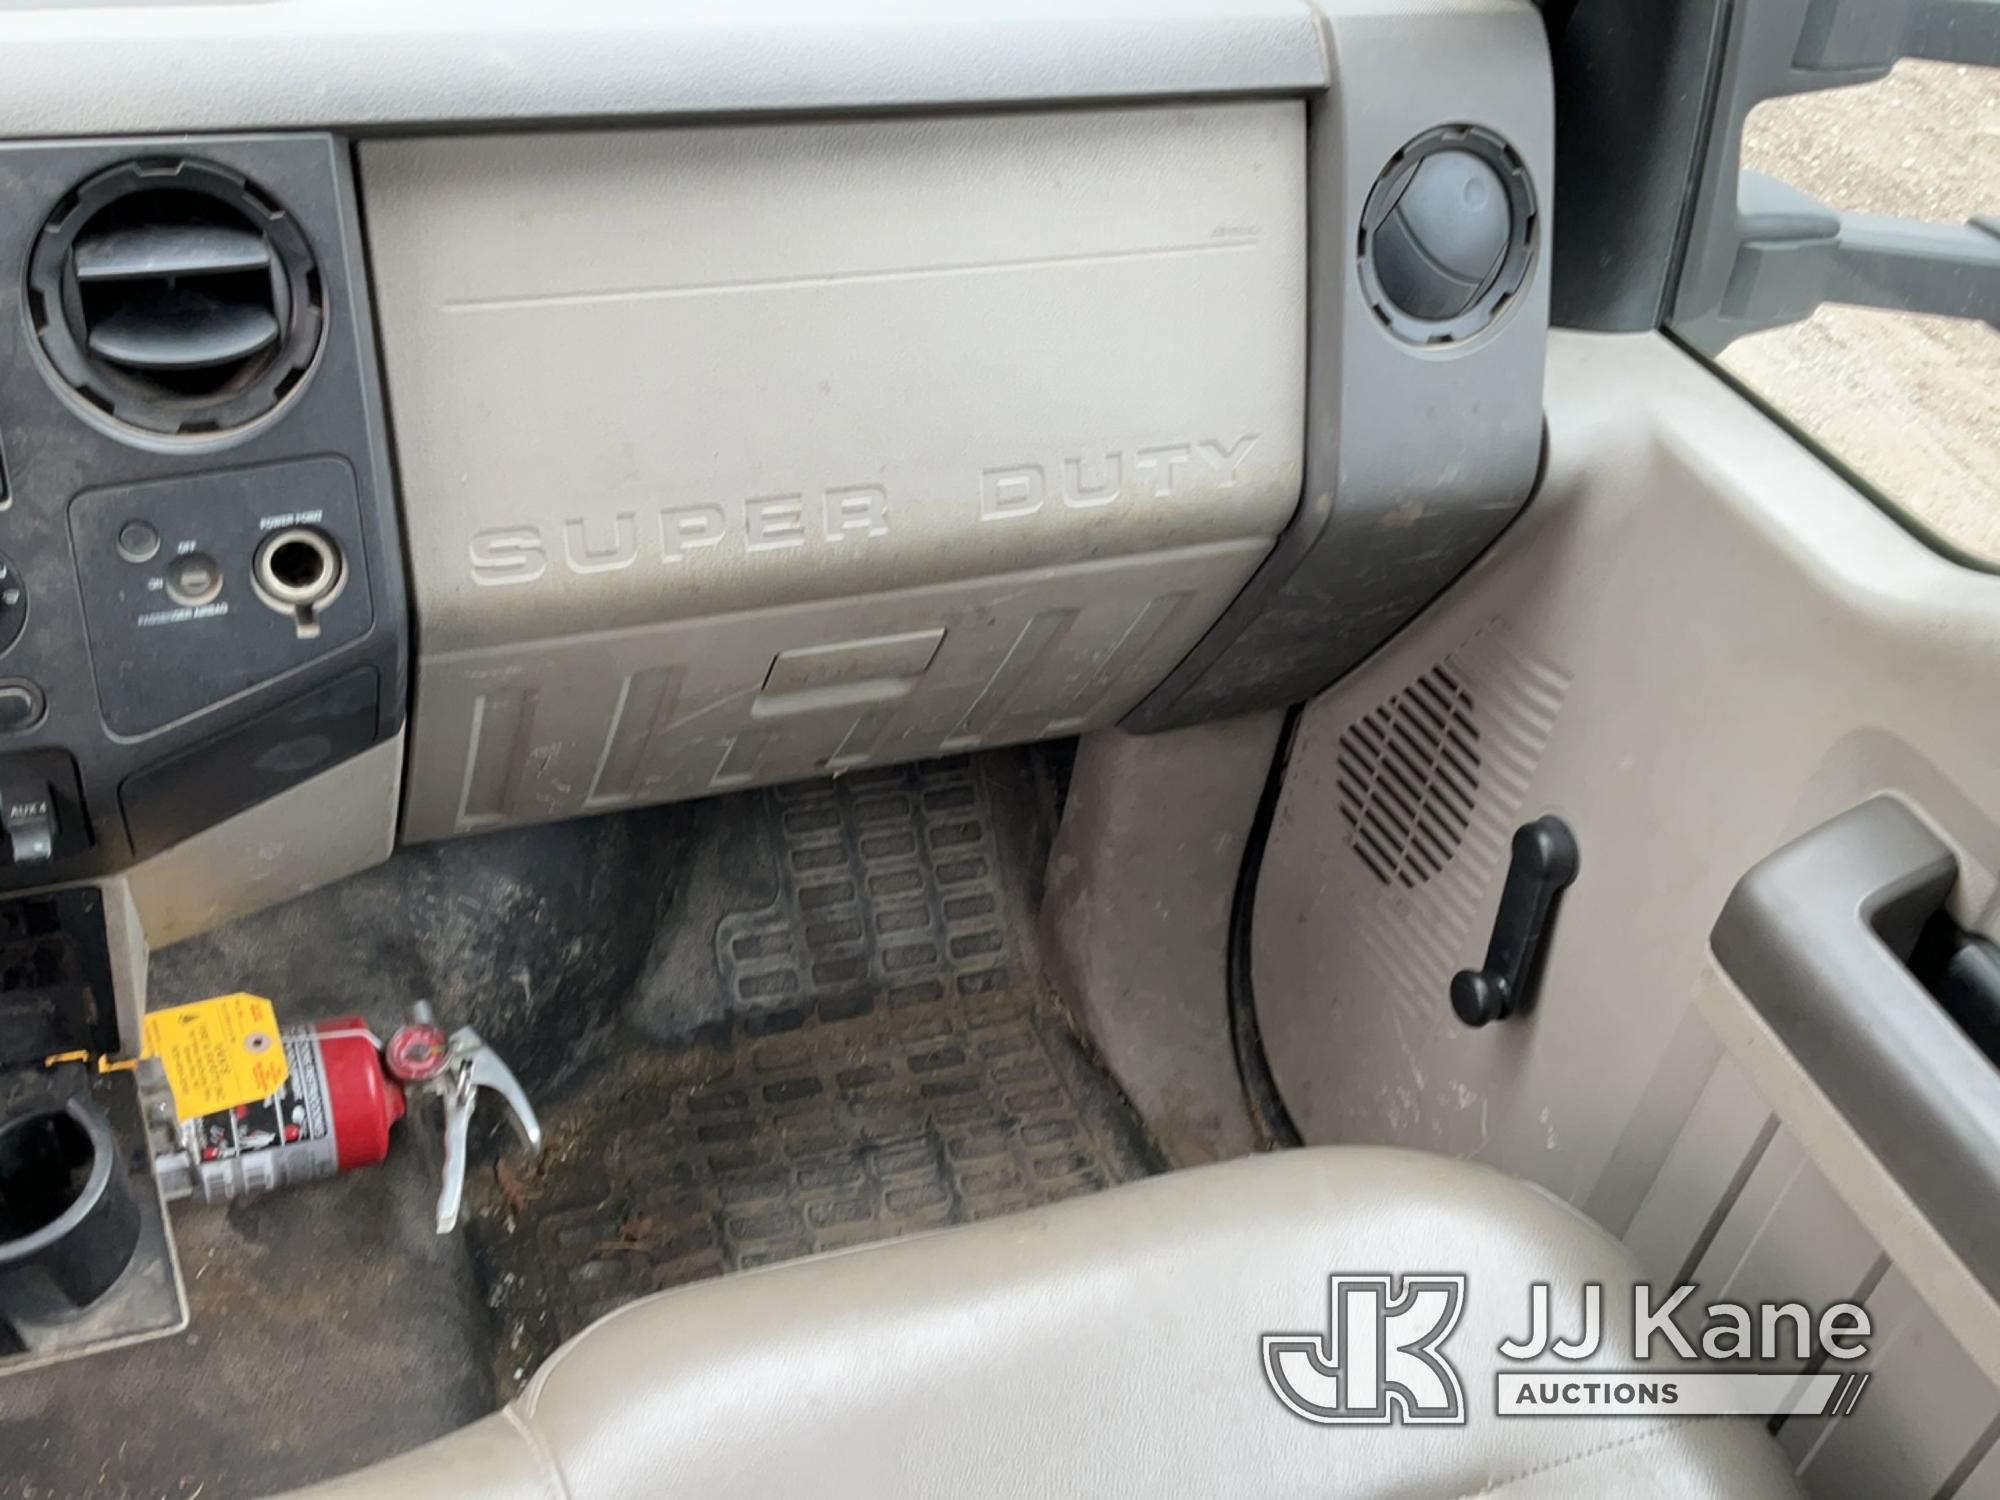 (South Beloit, IL) 2008 Ford F350 Flatbed/Service Truck Runs & Moves) (Check Engine Light On